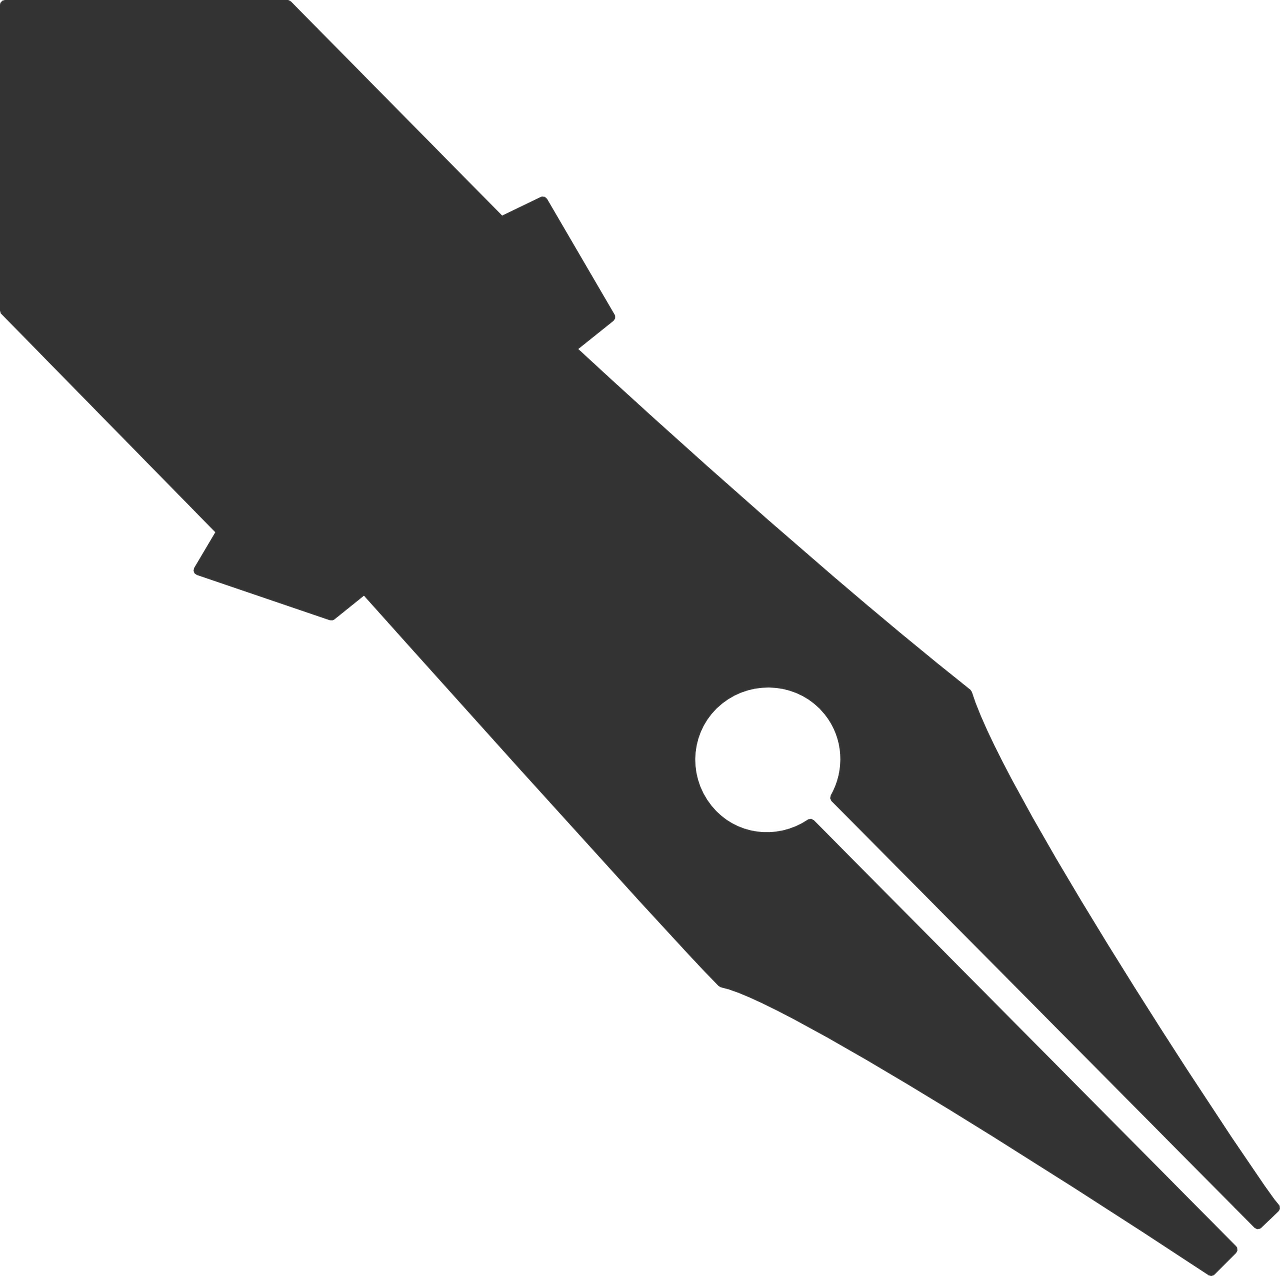 a pen with a shadow on a black background, lineart, polycount, hurufiyya, black backround. inkscape, taken in the late 2000s, arrow shaped, dark ( spaceship )